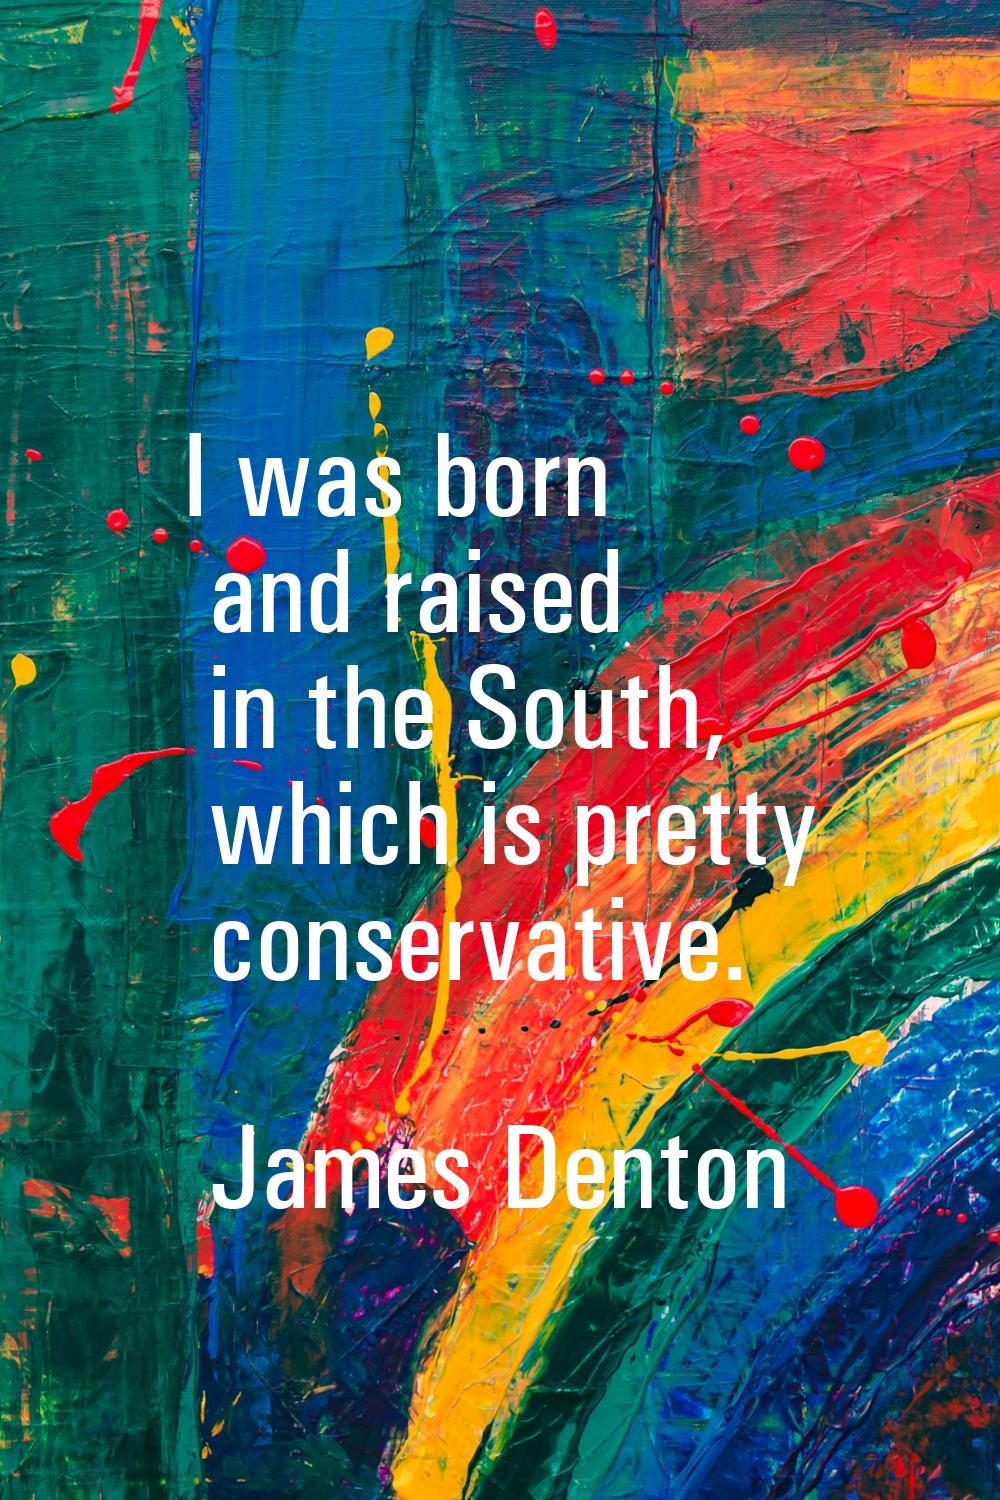 I was born and raised in the South, which is pretty conservative.